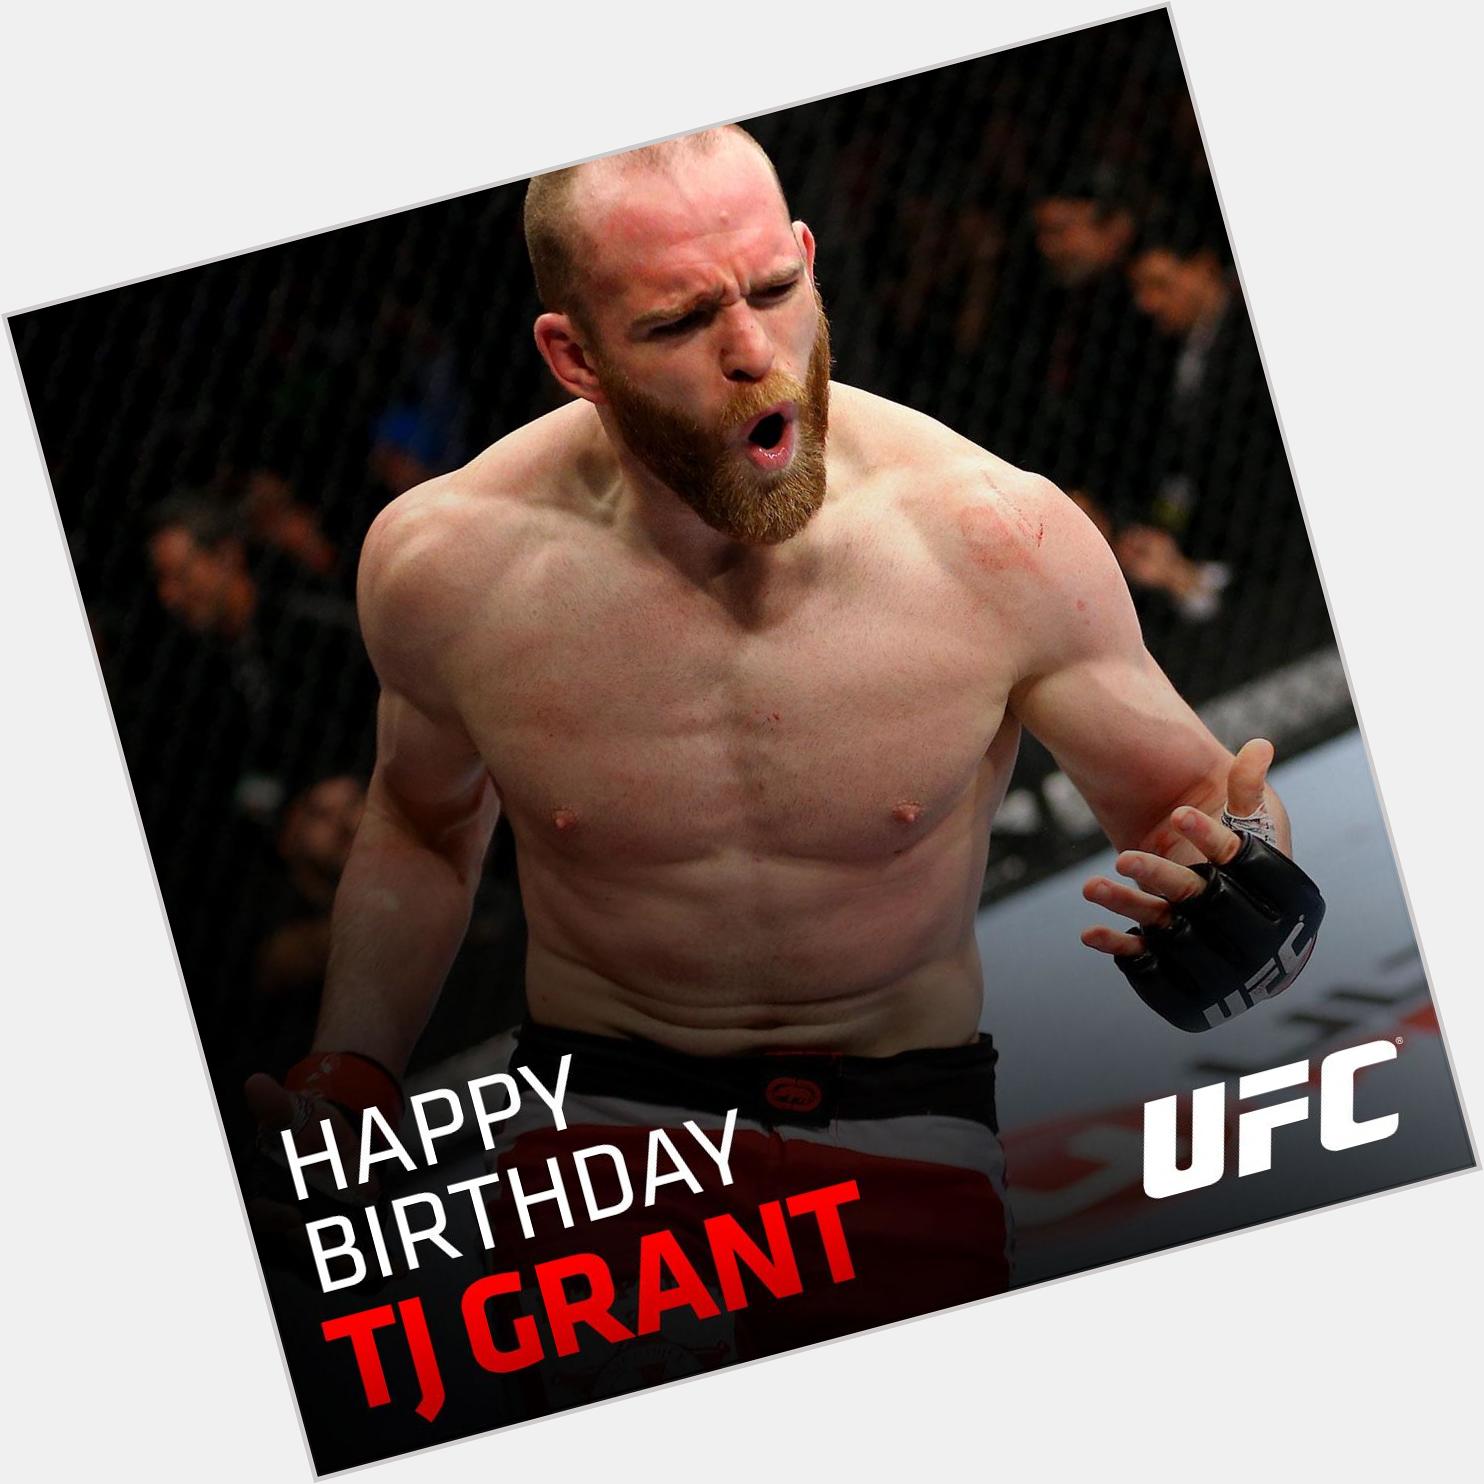 To wish Canadian UFC fighter a Happy Birthday today! 